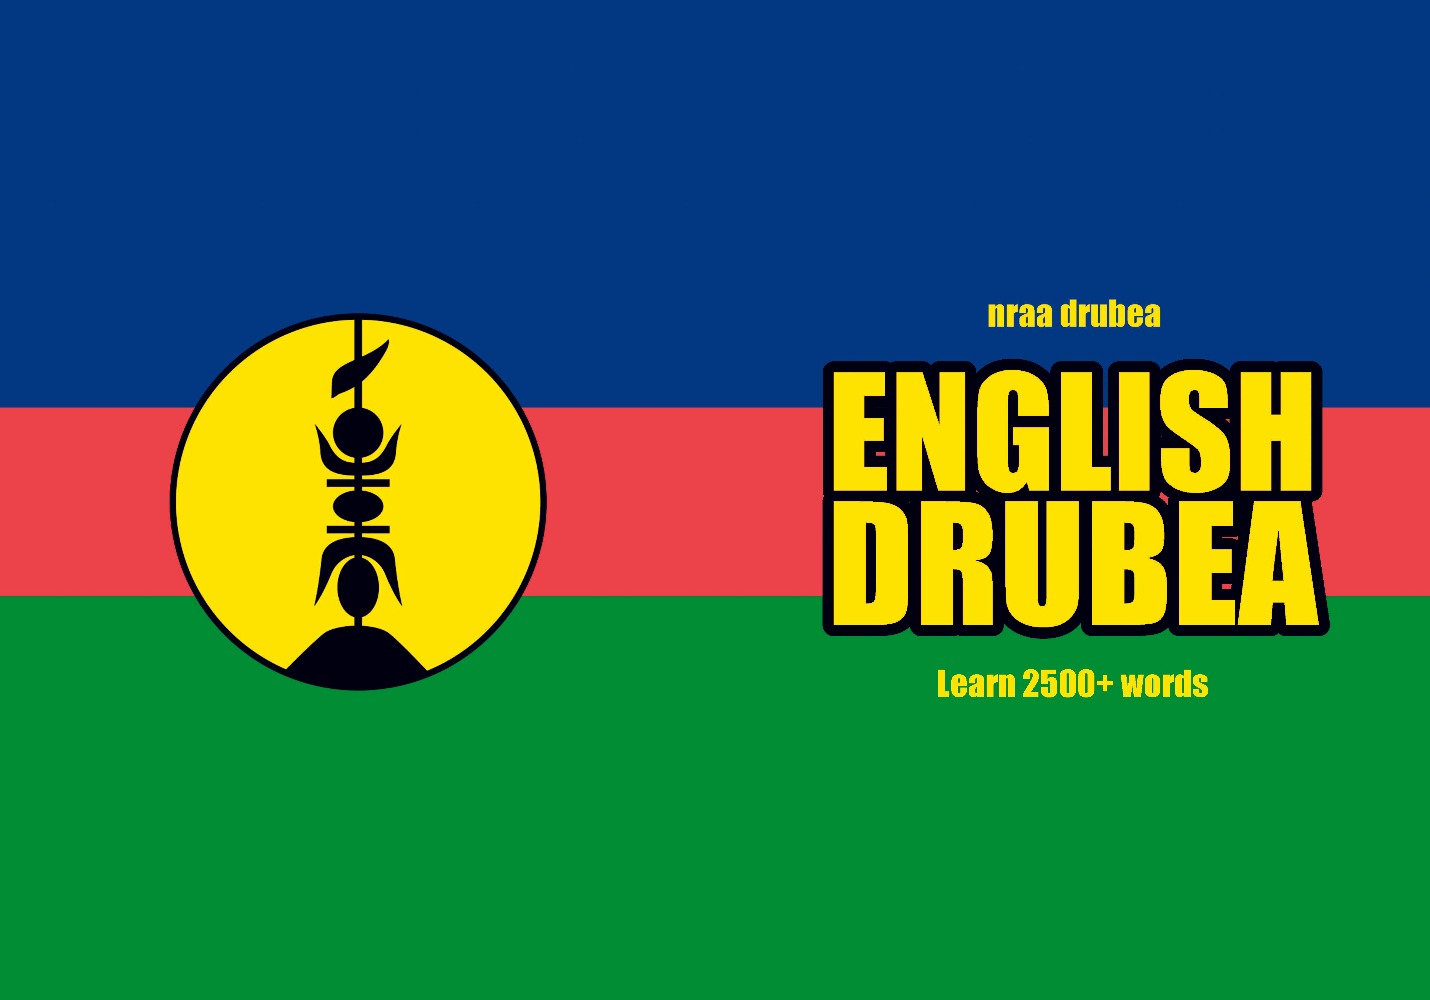 Drubea language learning notebook cover